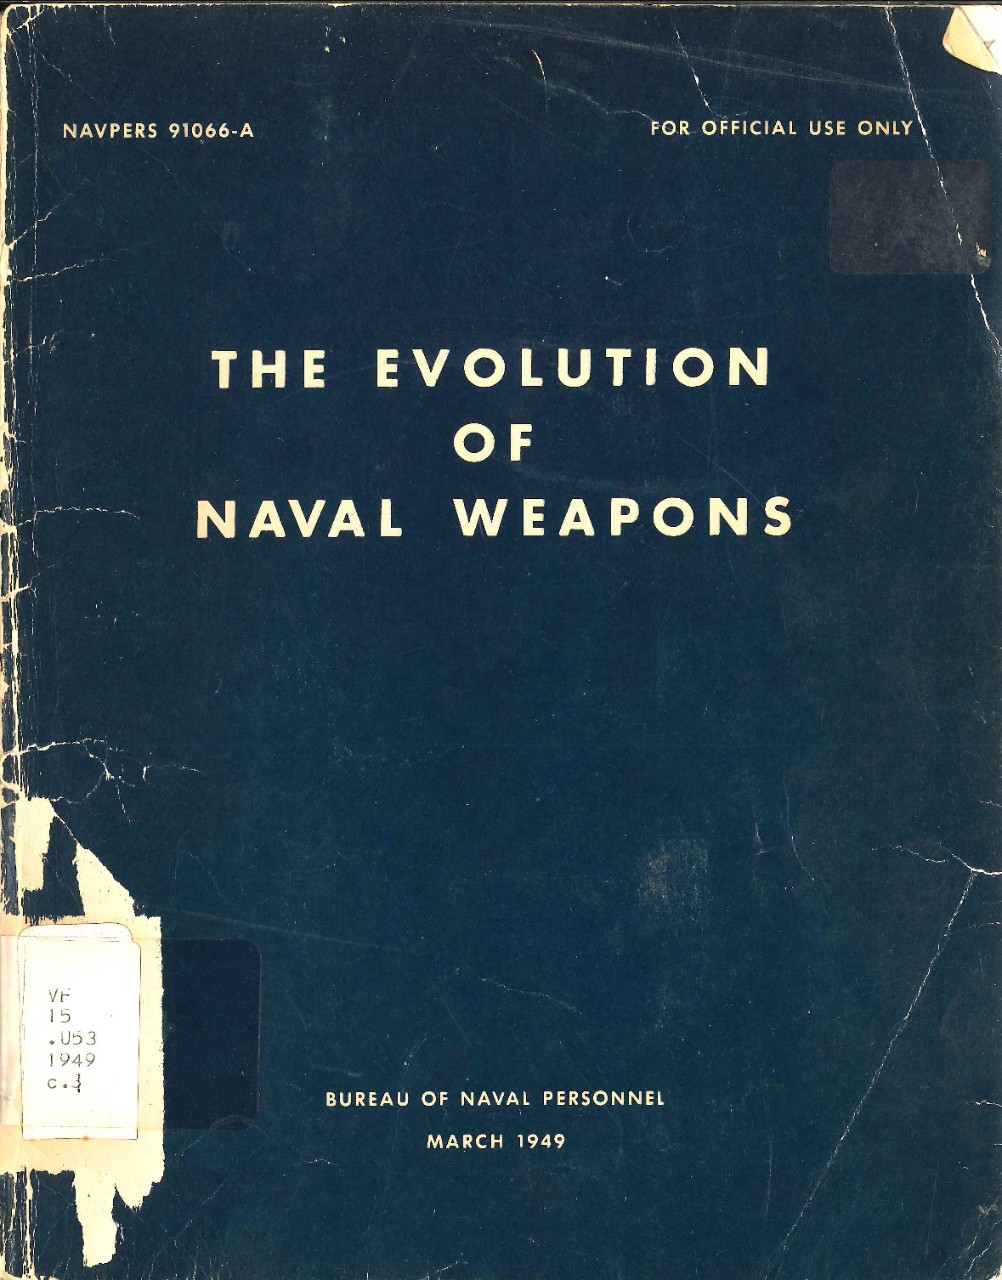 The Evolution of Naval Weapons